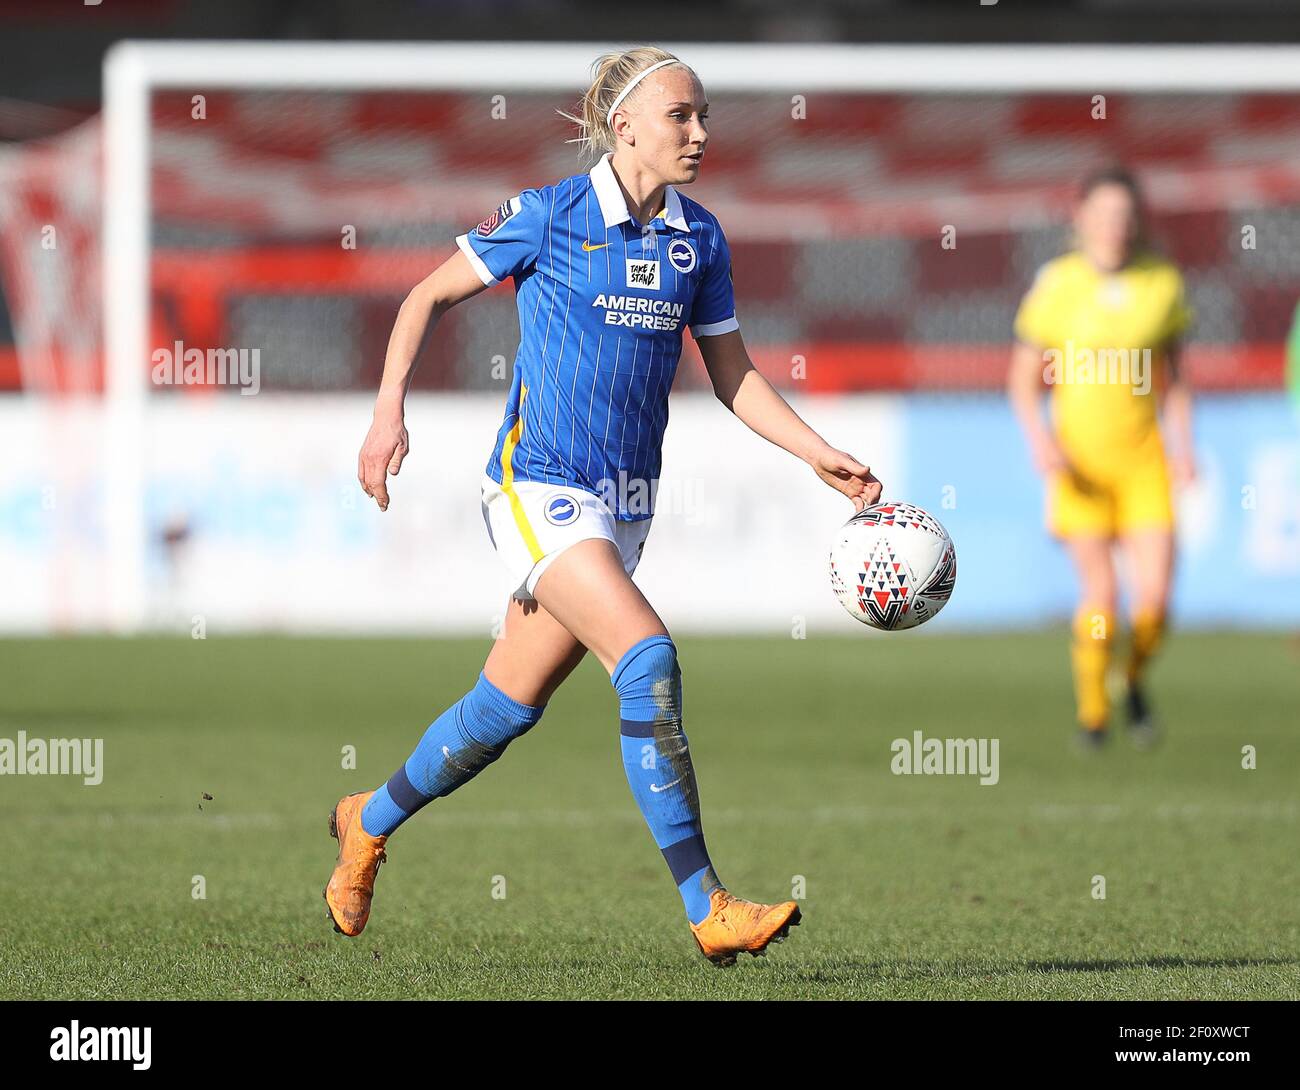 Crawley, UK. 7th March 2021. Emma Koivisto of Brighton during the FA Women's Super League match between Brighton & Hove Albion Women and Tottenham Hotspur Women at The People's Pension Stadium on March 7th 2021 in Crawley, United Kingdom Stock Photo